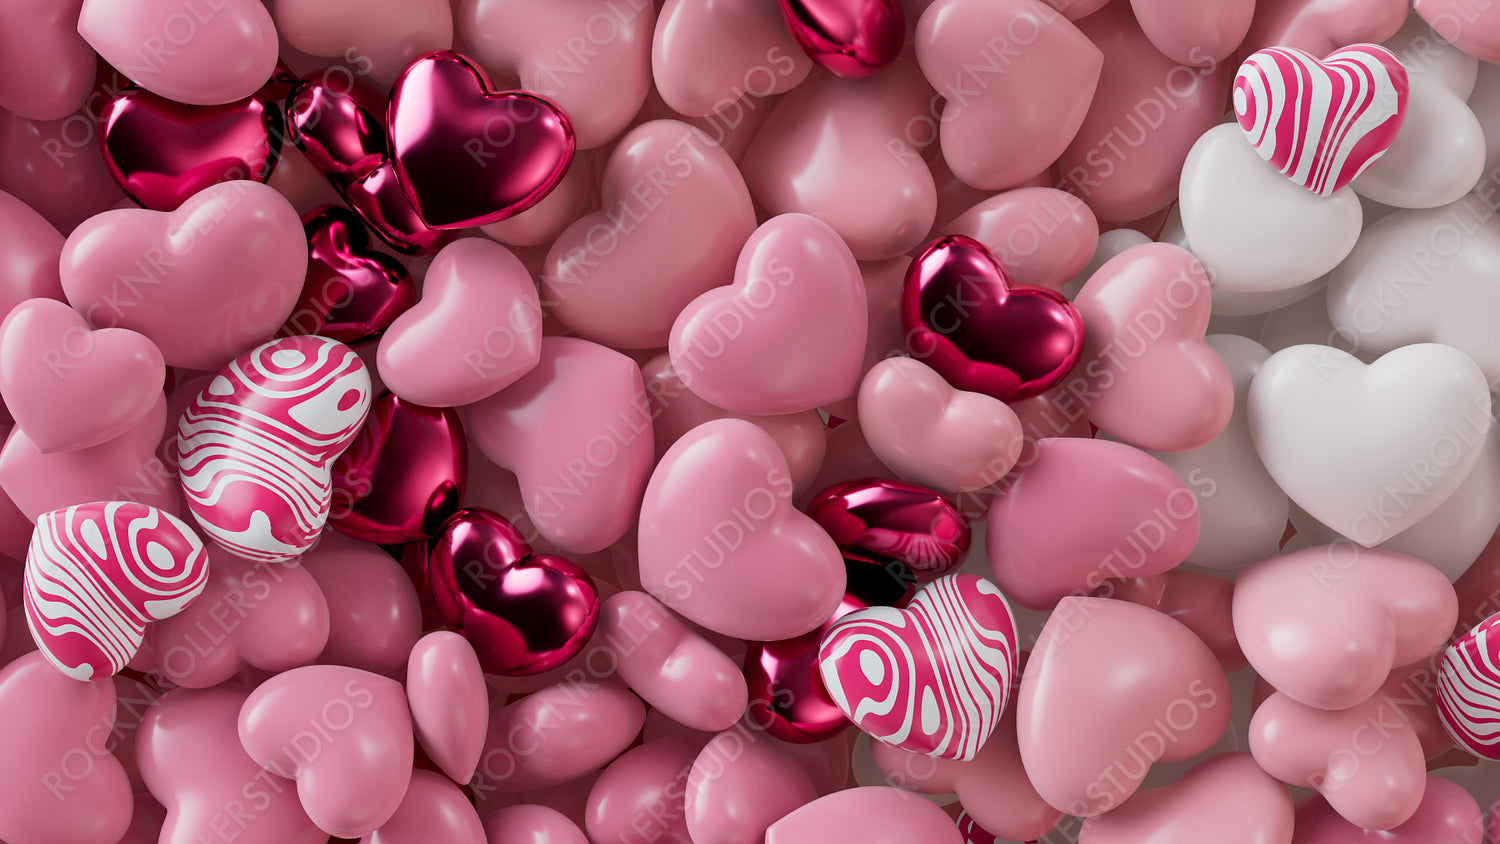 Multicolored Heart background. Valentine Wallpaper with Pink, White and Metallic love hearts. 3D Render